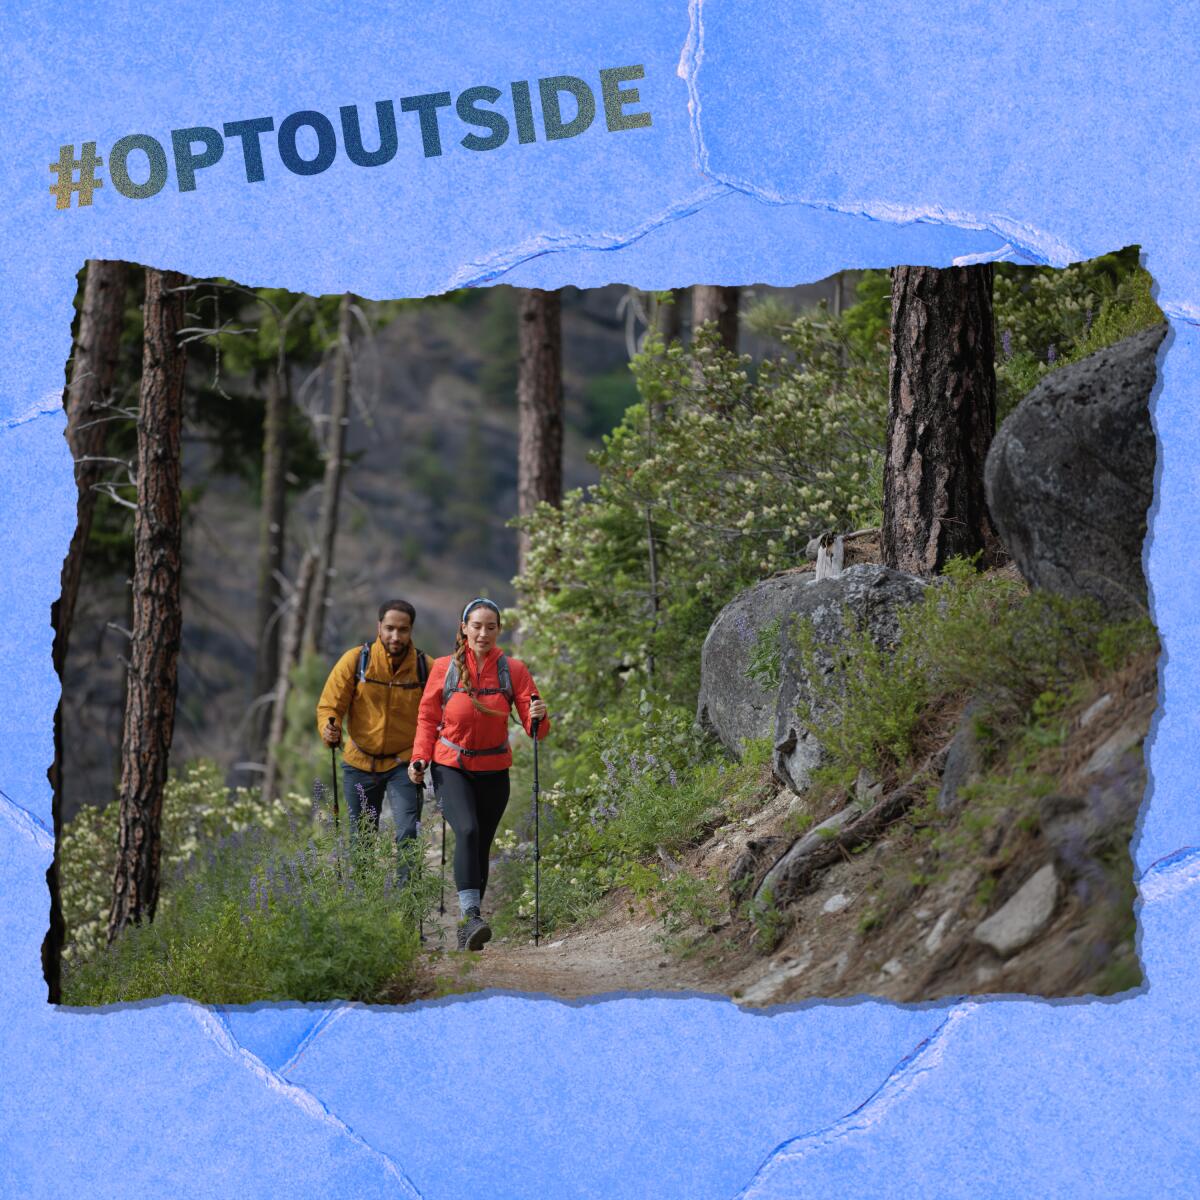 Two hikers along a path with '#optoutside' written above